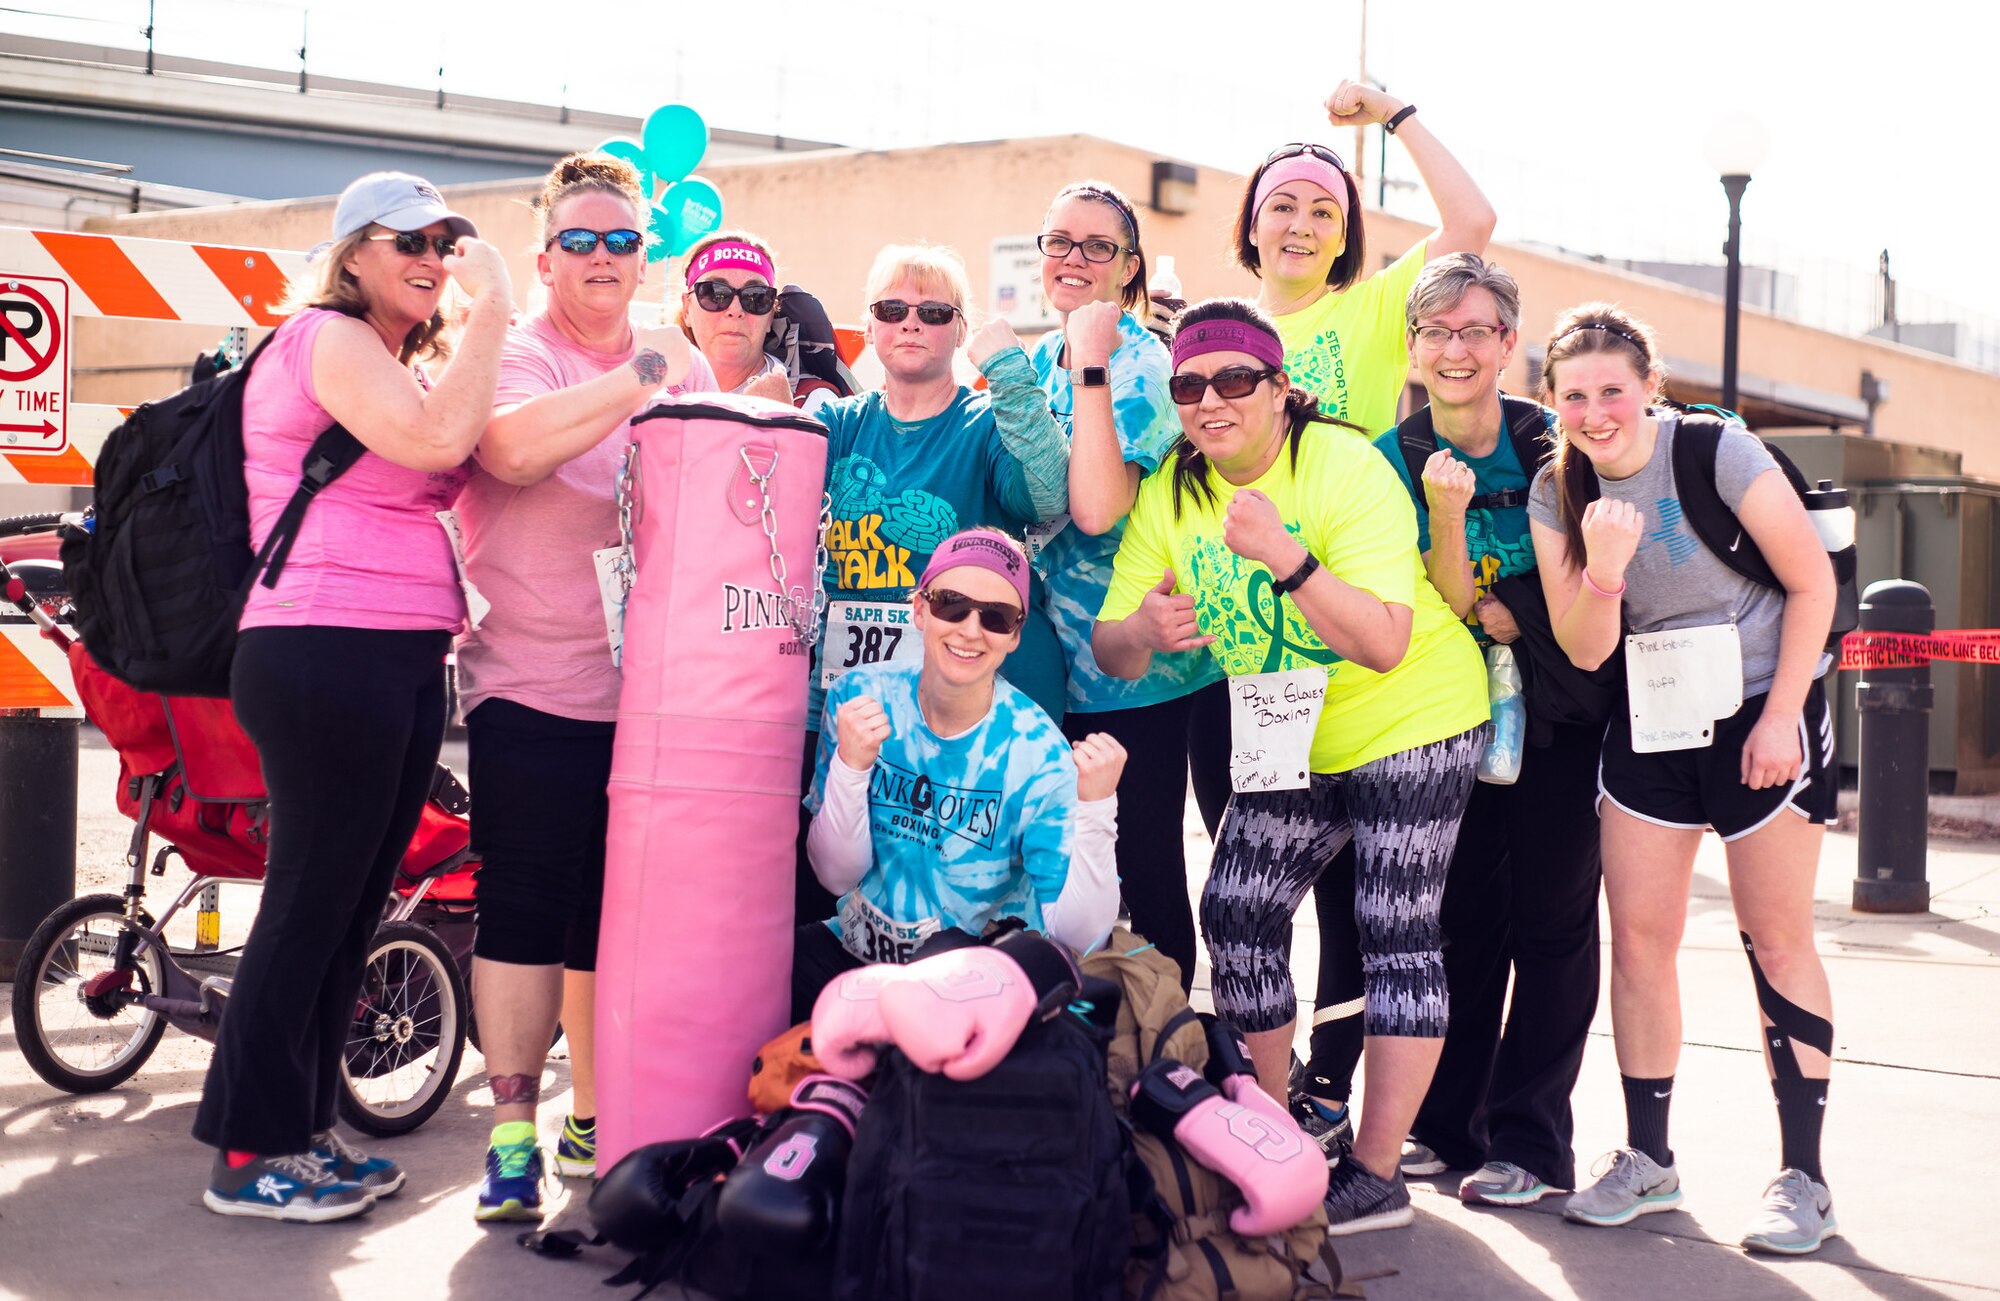 Women with Pink Gloves Boxing rucked with 40-pound ruck sacks during the 2017 Sexual Assault Awareness and Prevention 5k Ruck, Run, or Walk event on April 8, 2017 in Cheyenne, Wyoming.
  
This annual event is designed to bring awareness to sexual assault and show support to sexual assault victims. (Courtesy Photo by Daniel de La Fé)